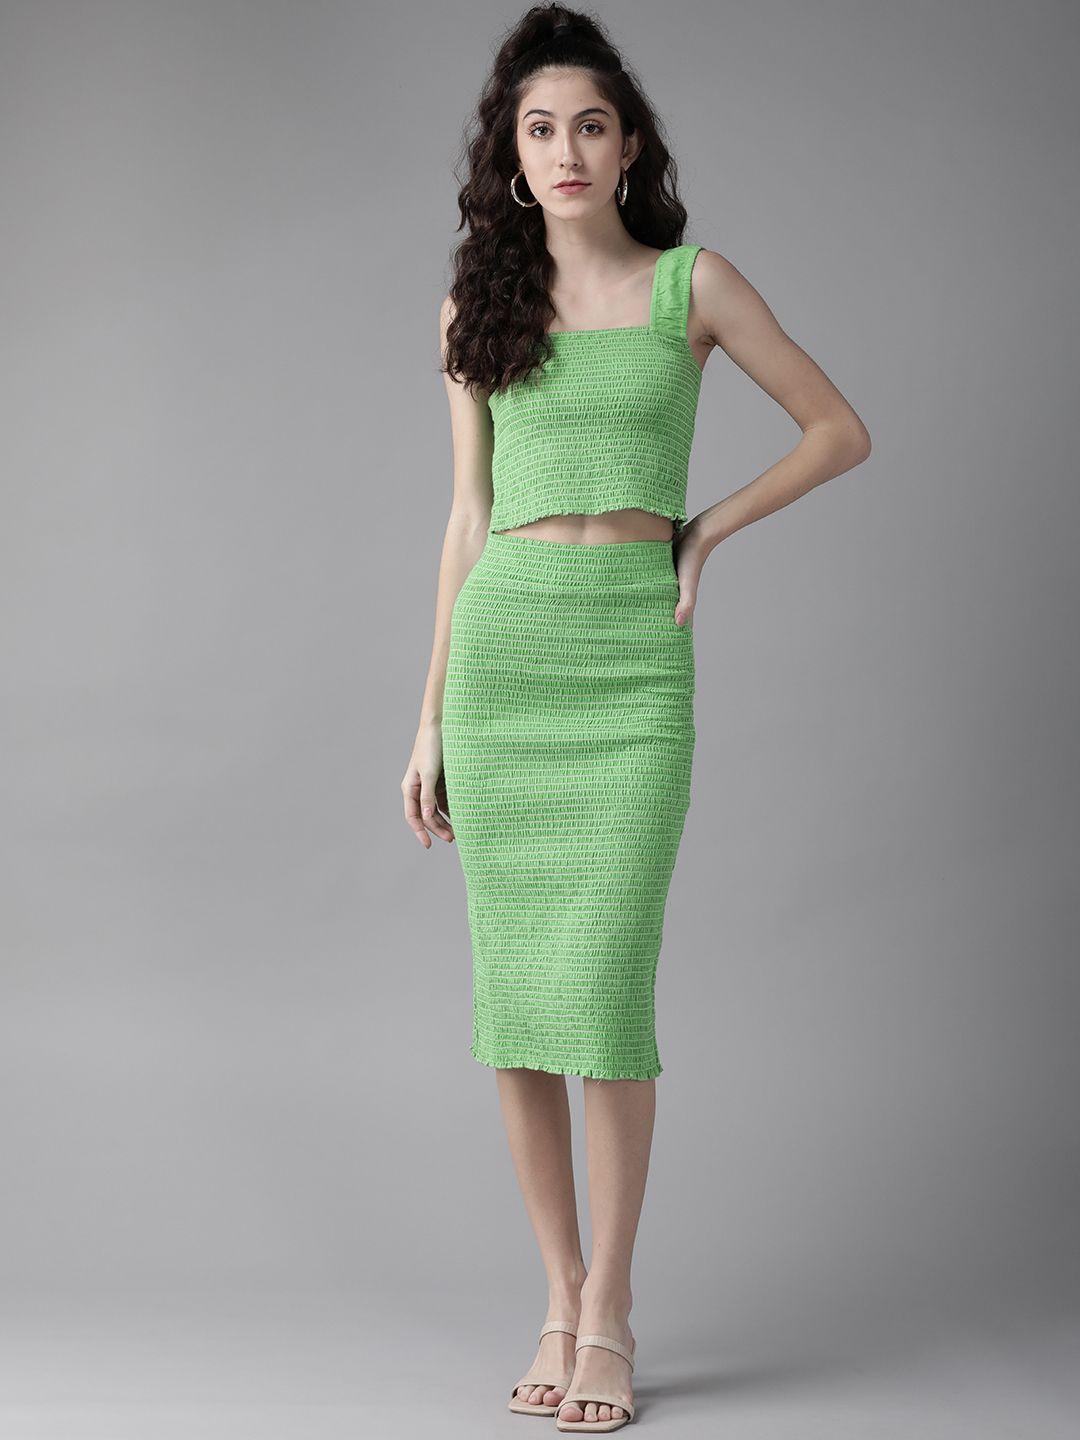 the dry state women green smocked top with skirt